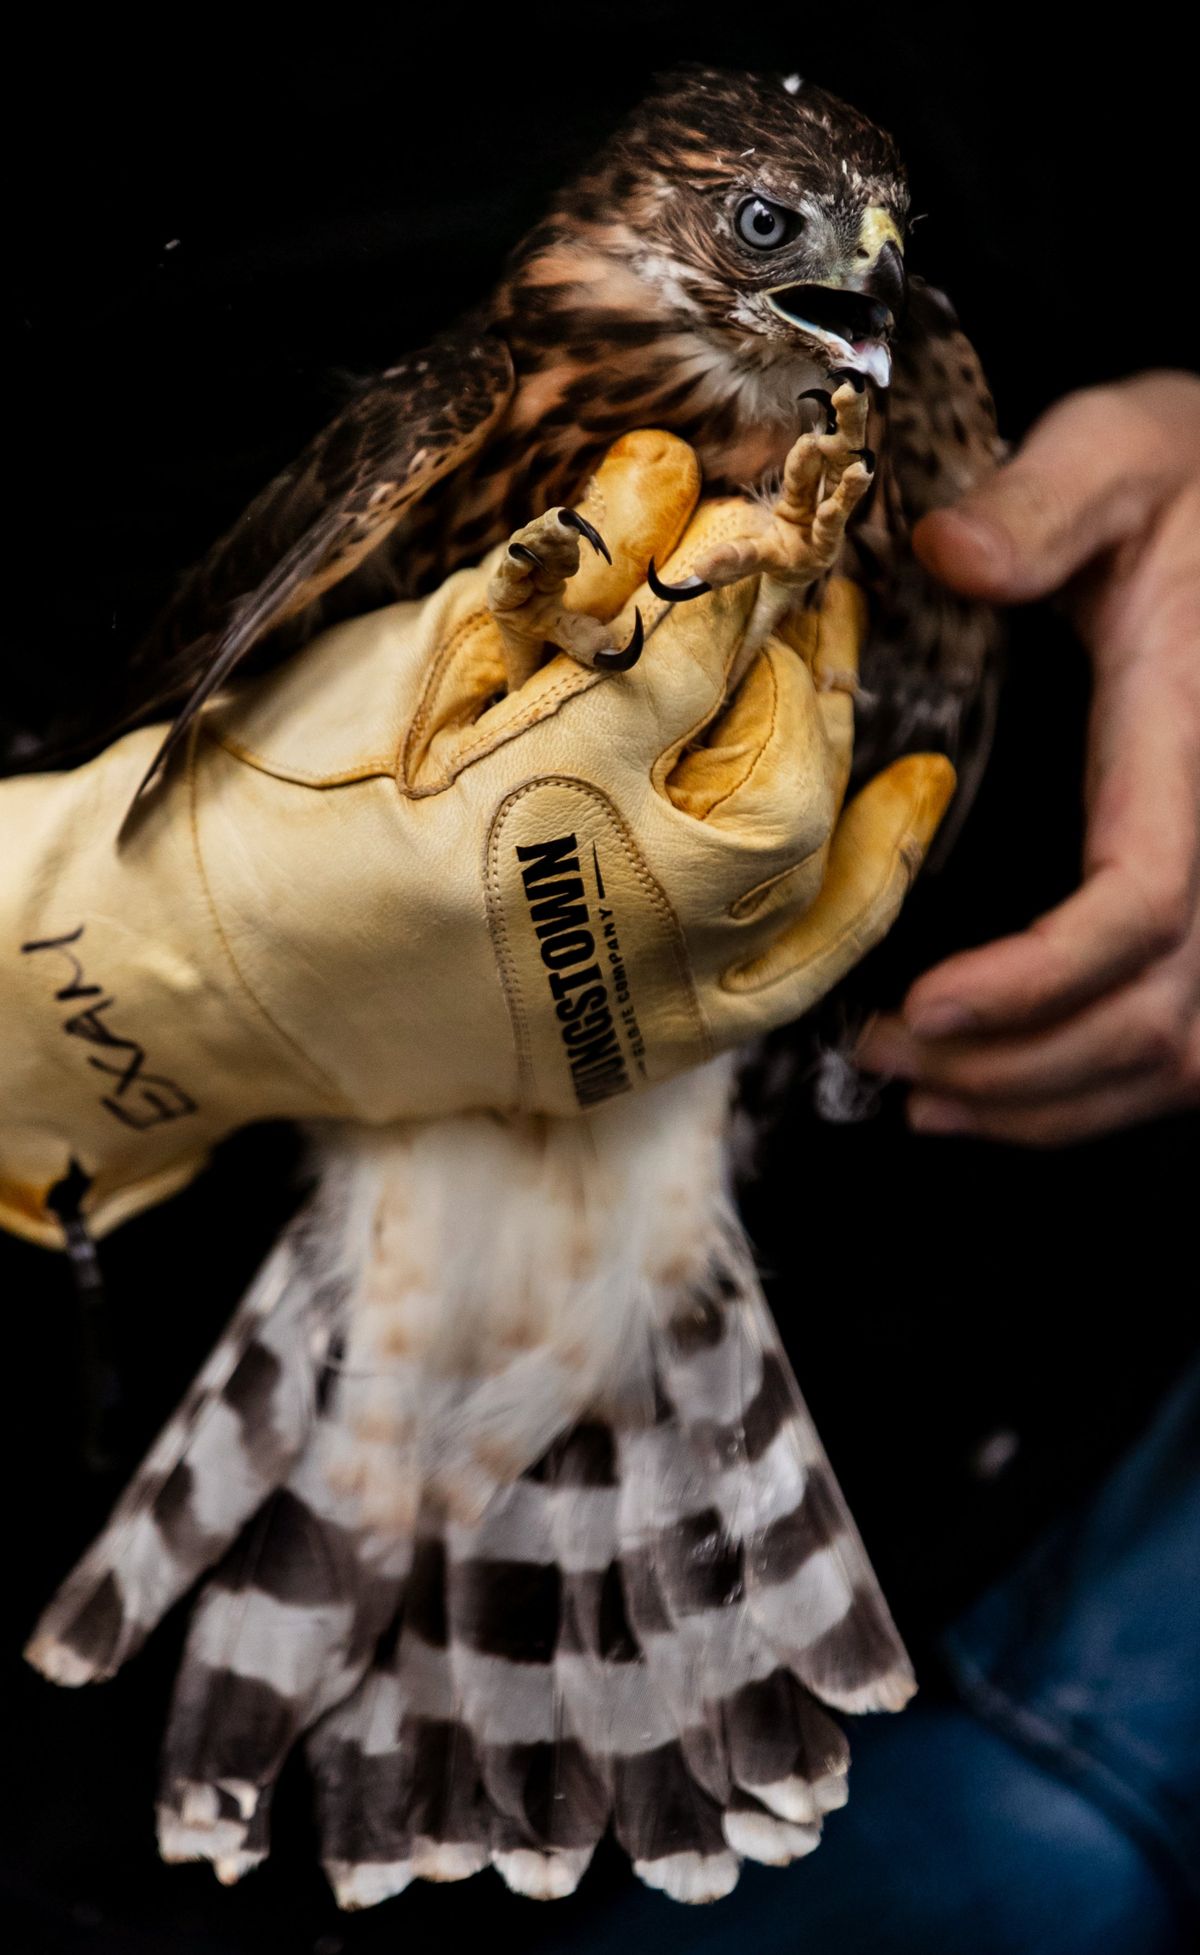 This fledgling Cooper’s hawk was treated at the PAWS Wildlife Center in Lynnwood, Washington, after it apparently jumped from its nest in a towering cedar tree in Seattle during last month’s heat wave. Animal rehabilitation centers across the region were flooded with dozens of ailing baby birds.  (Erika Schultz/The Seattle Times)